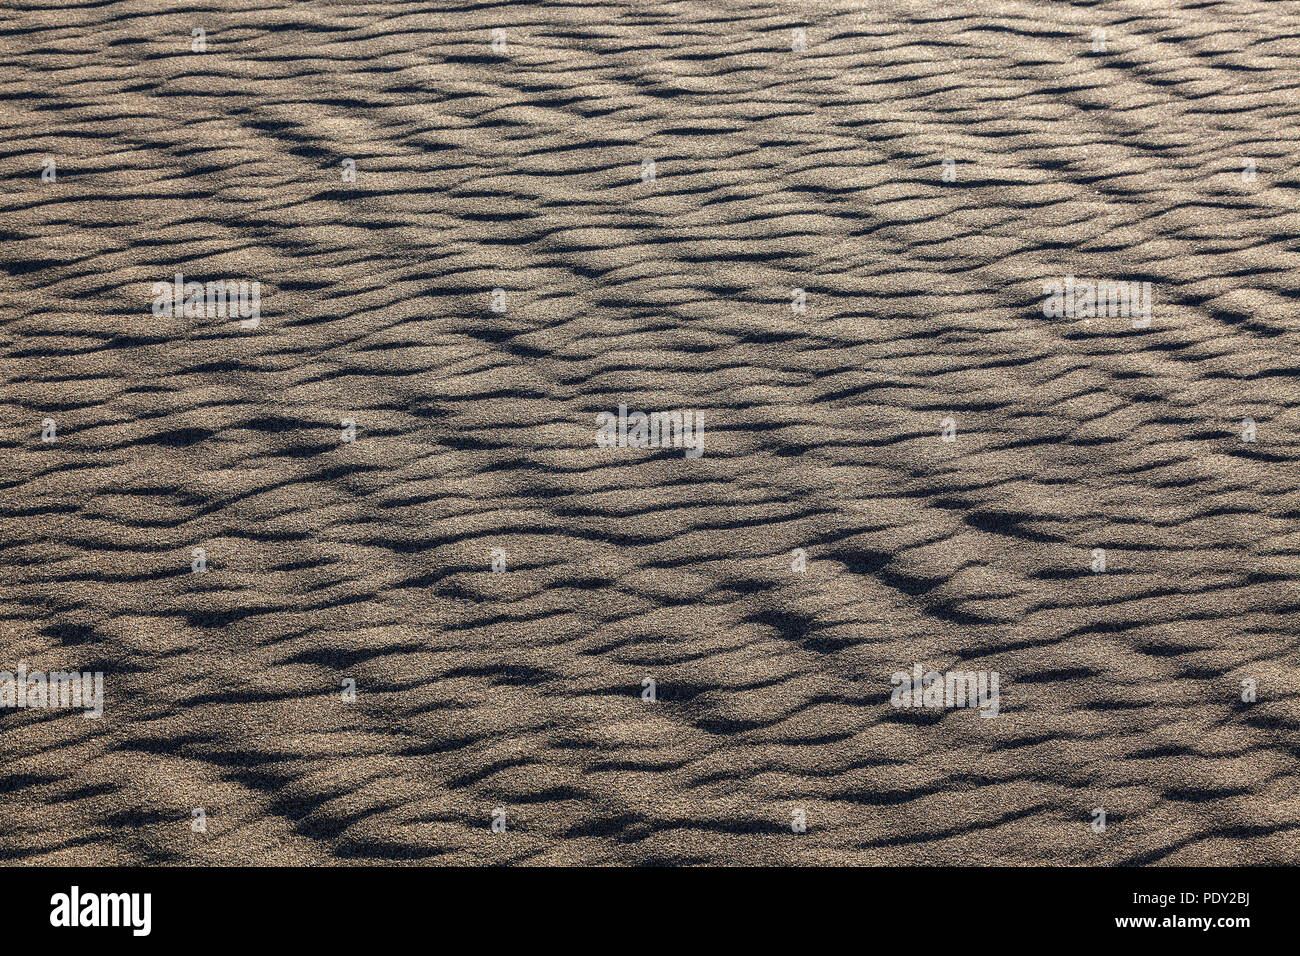 Structures in the sand, dunes of Maspalomas, Dunas de Maspalomas, structures in the sand, nature reserve, Gran Canaria Stock Photo